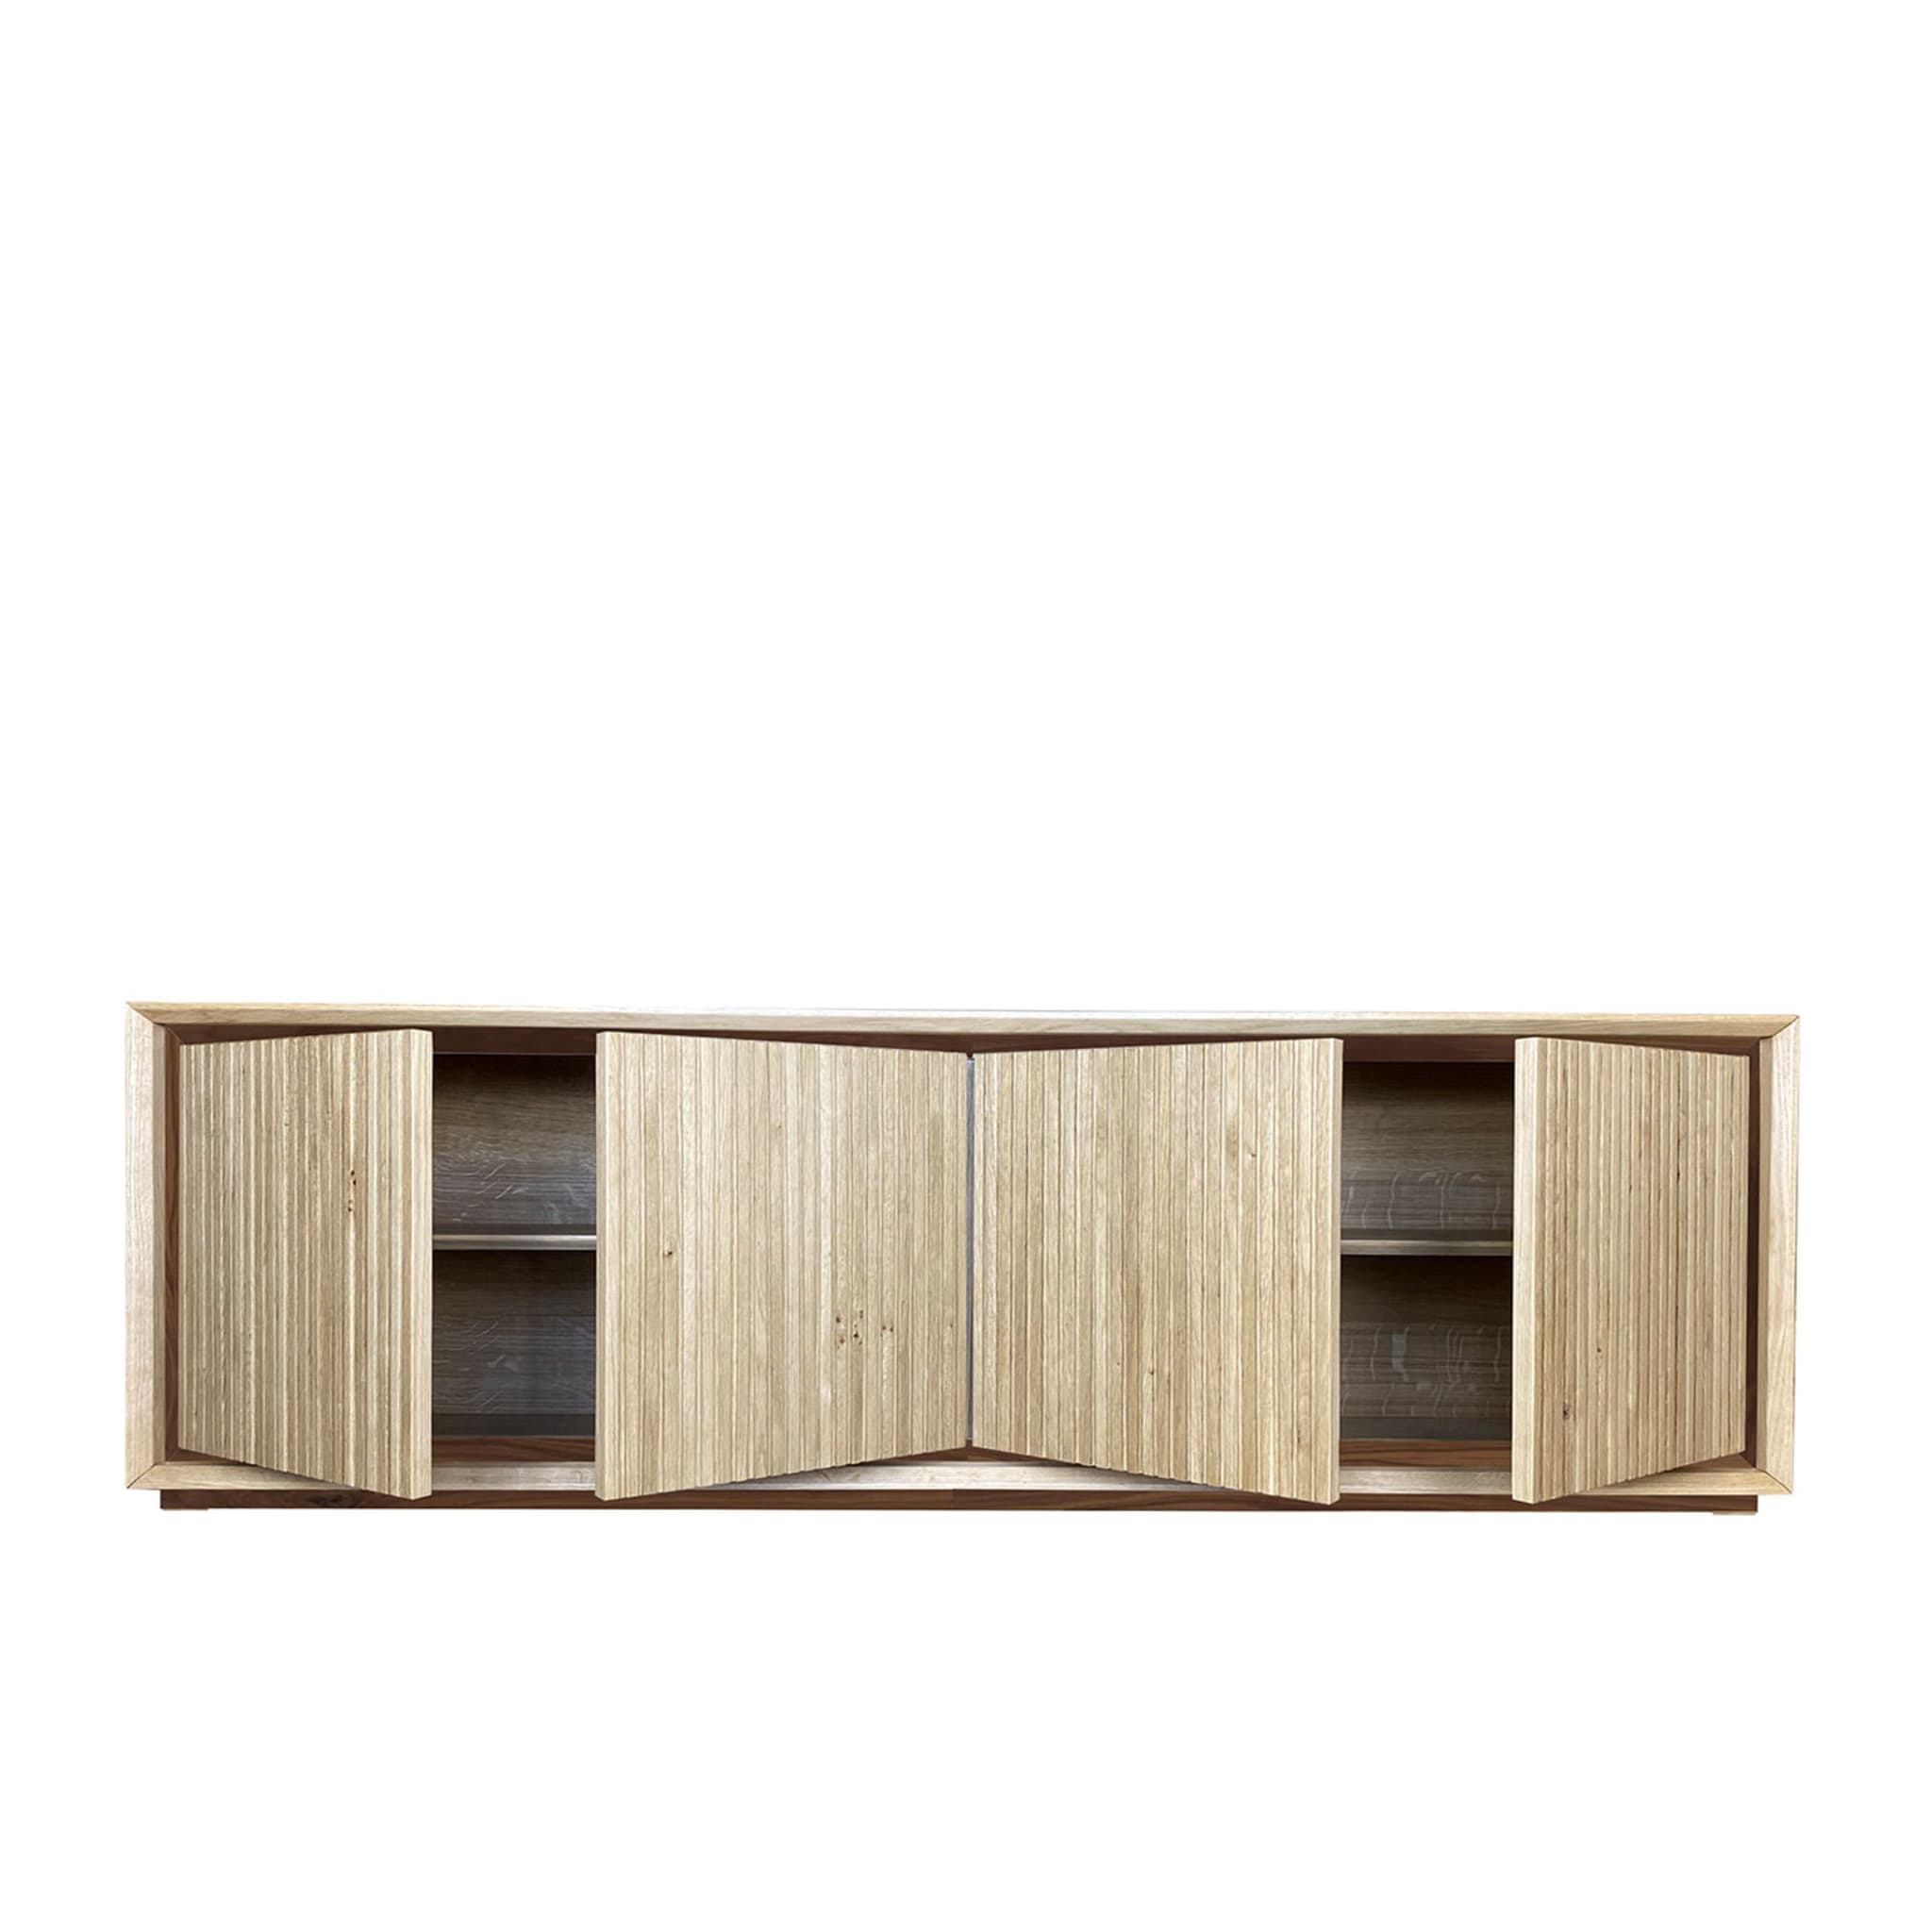 Fuga Noce Uno 4-Door Grooved Sideboard by Mascia Meccani - Alternative view 3